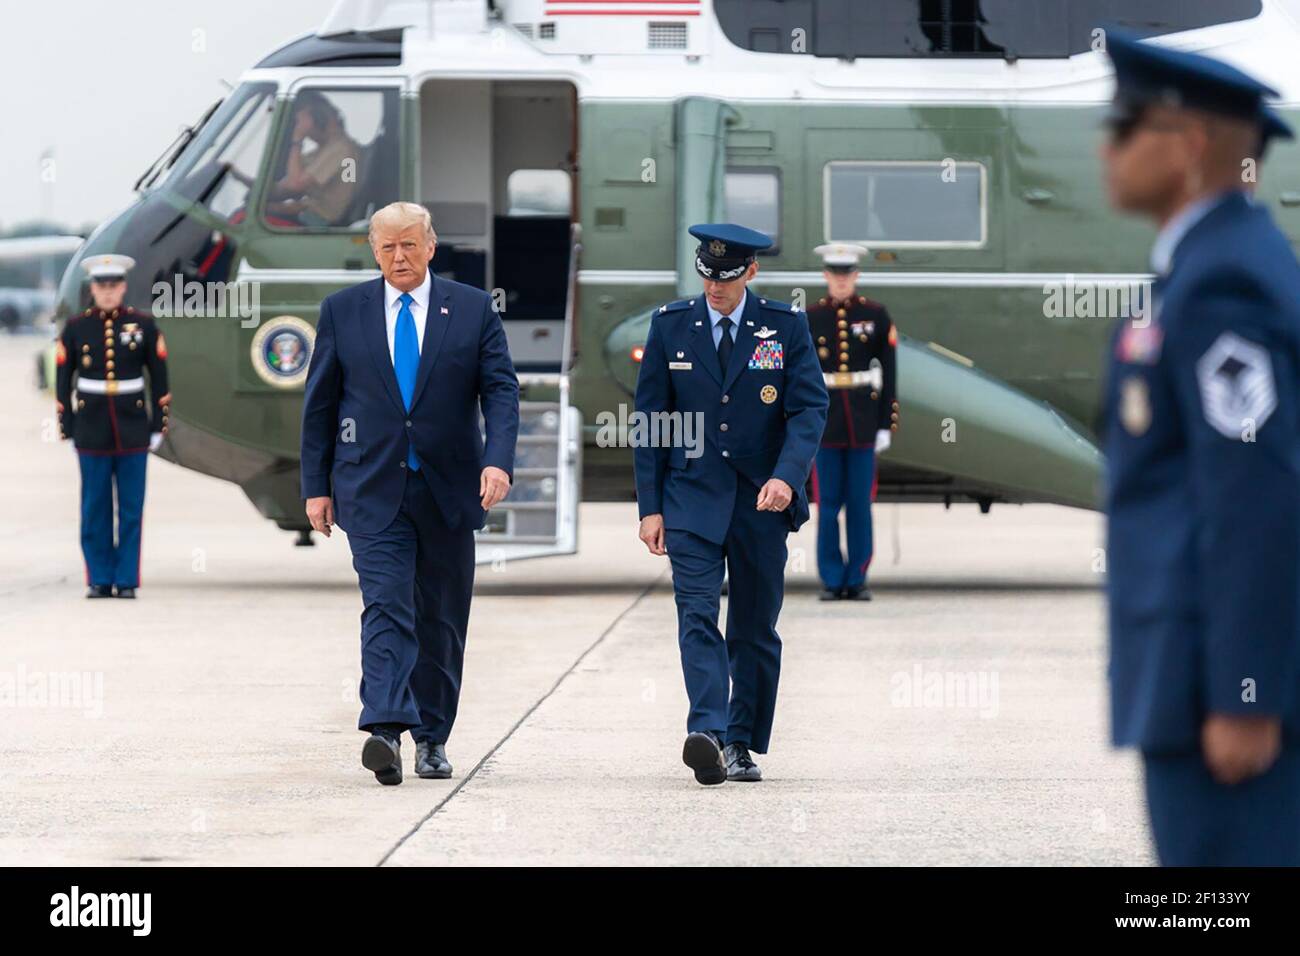 President Donald Trump disembarks Marine One at Joint Base Andrews Md. Thursday Sept. 24 2020 and is escorted to Air Force One by U.S. Air Force Col. Stephen Snelson Commander of the 89th Airlift Wing at Joint Base Andrews. Stock Photo